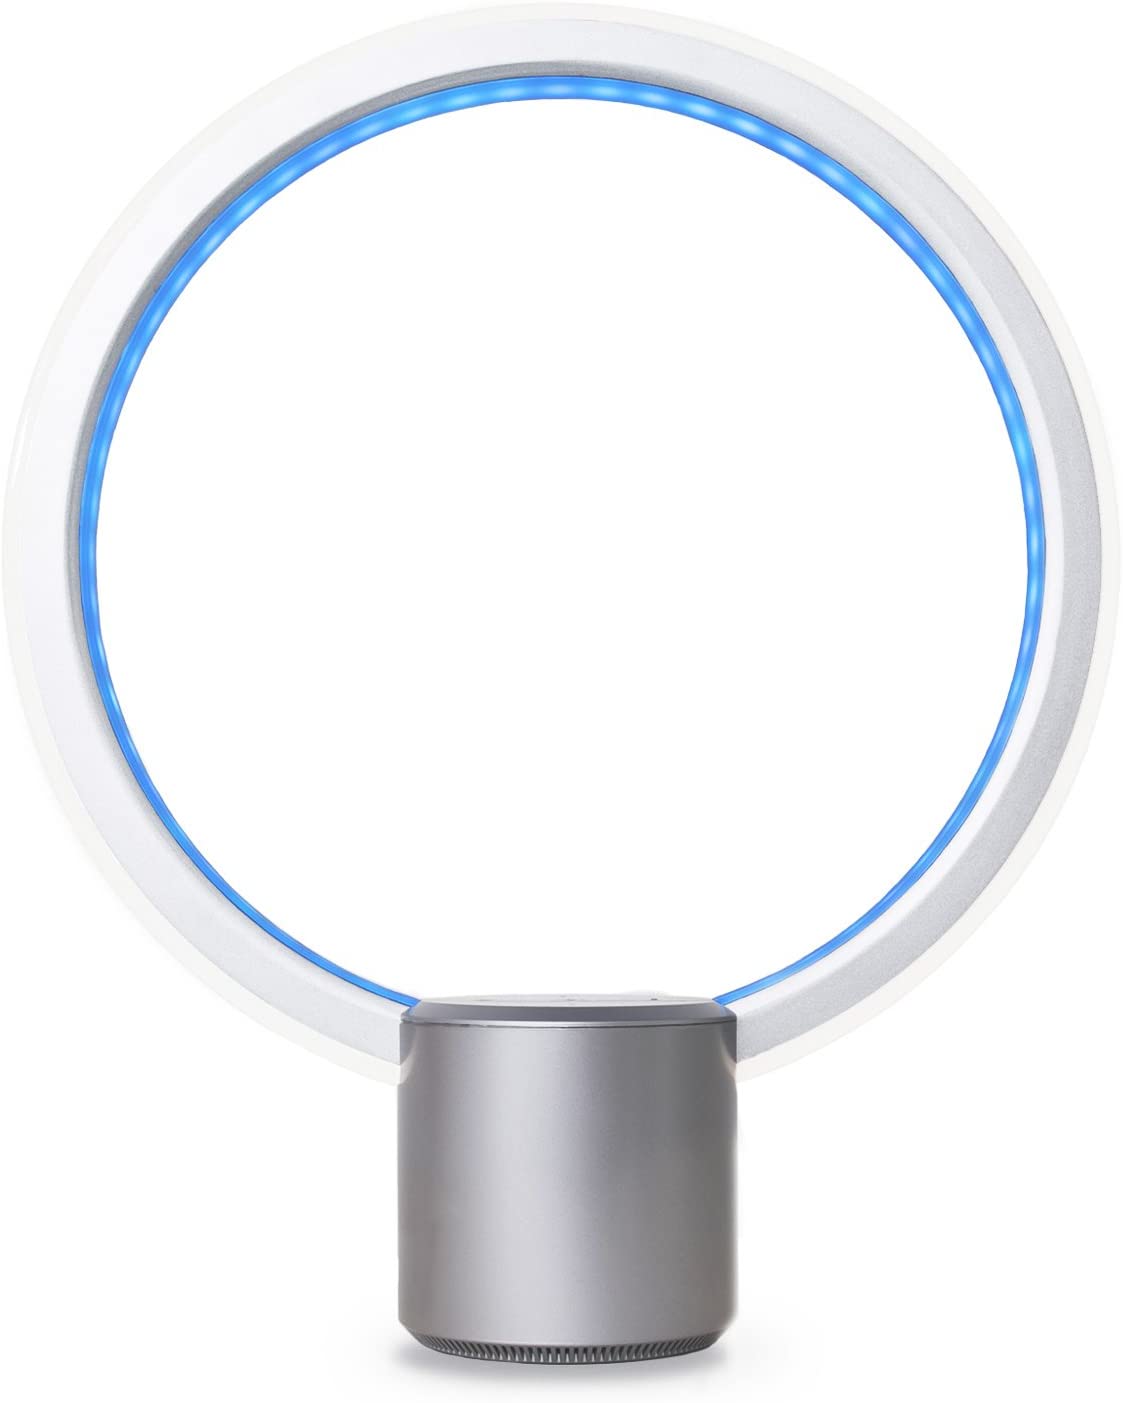 C by GE Sol Wifi Connected Smart Light for $49.99 AC